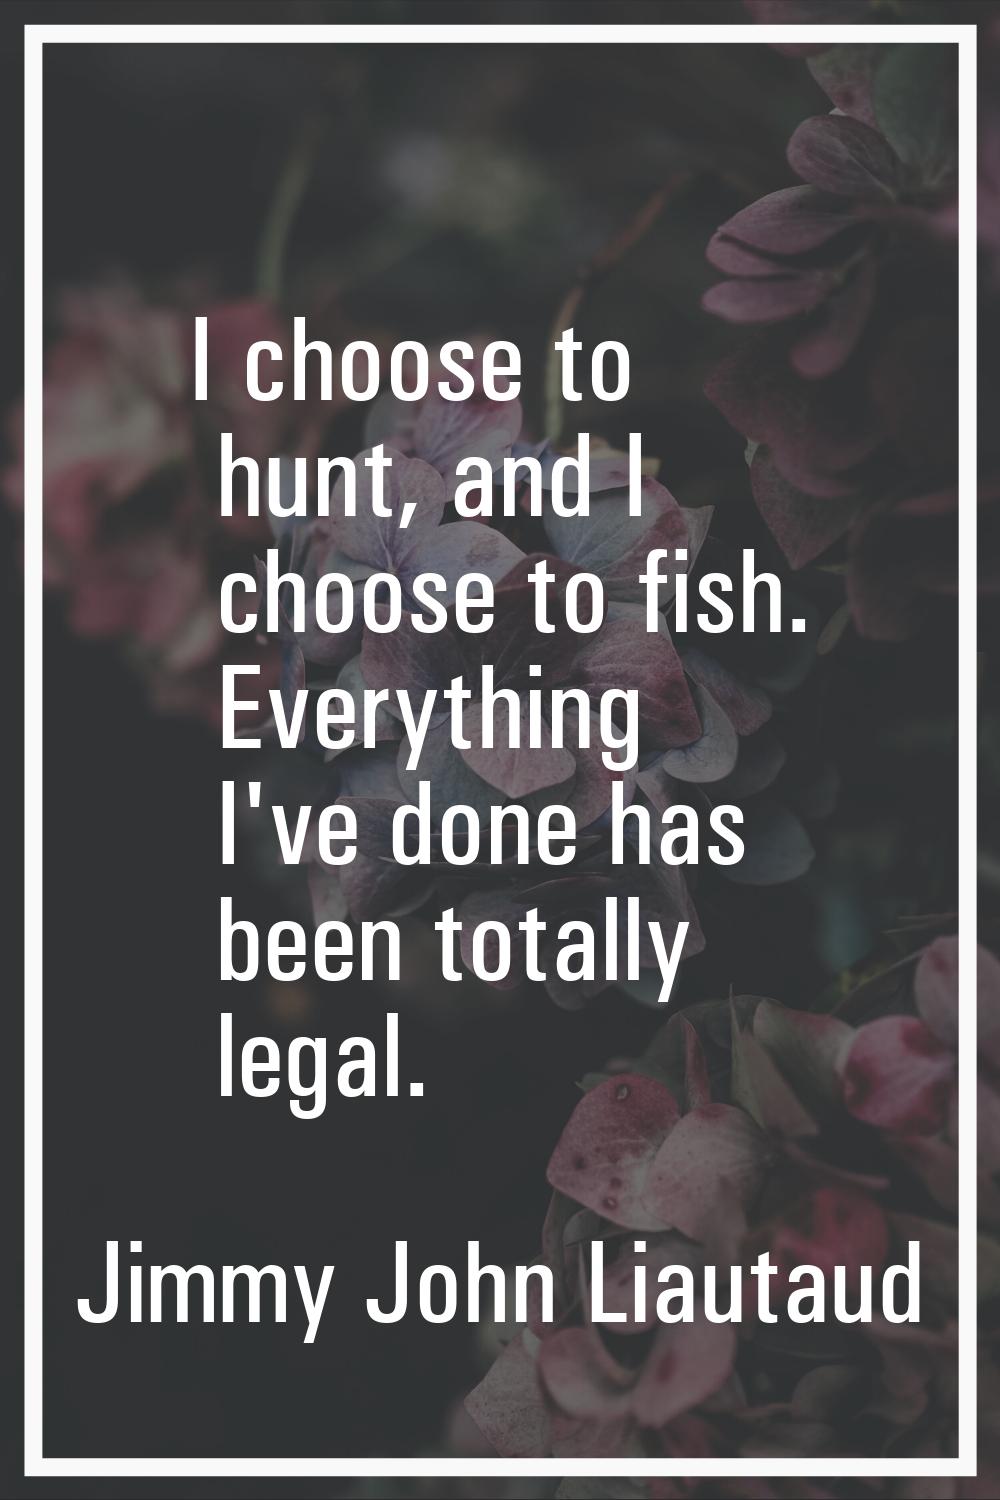 I choose to hunt, and I choose to fish. Everything I've done has been totally legal.